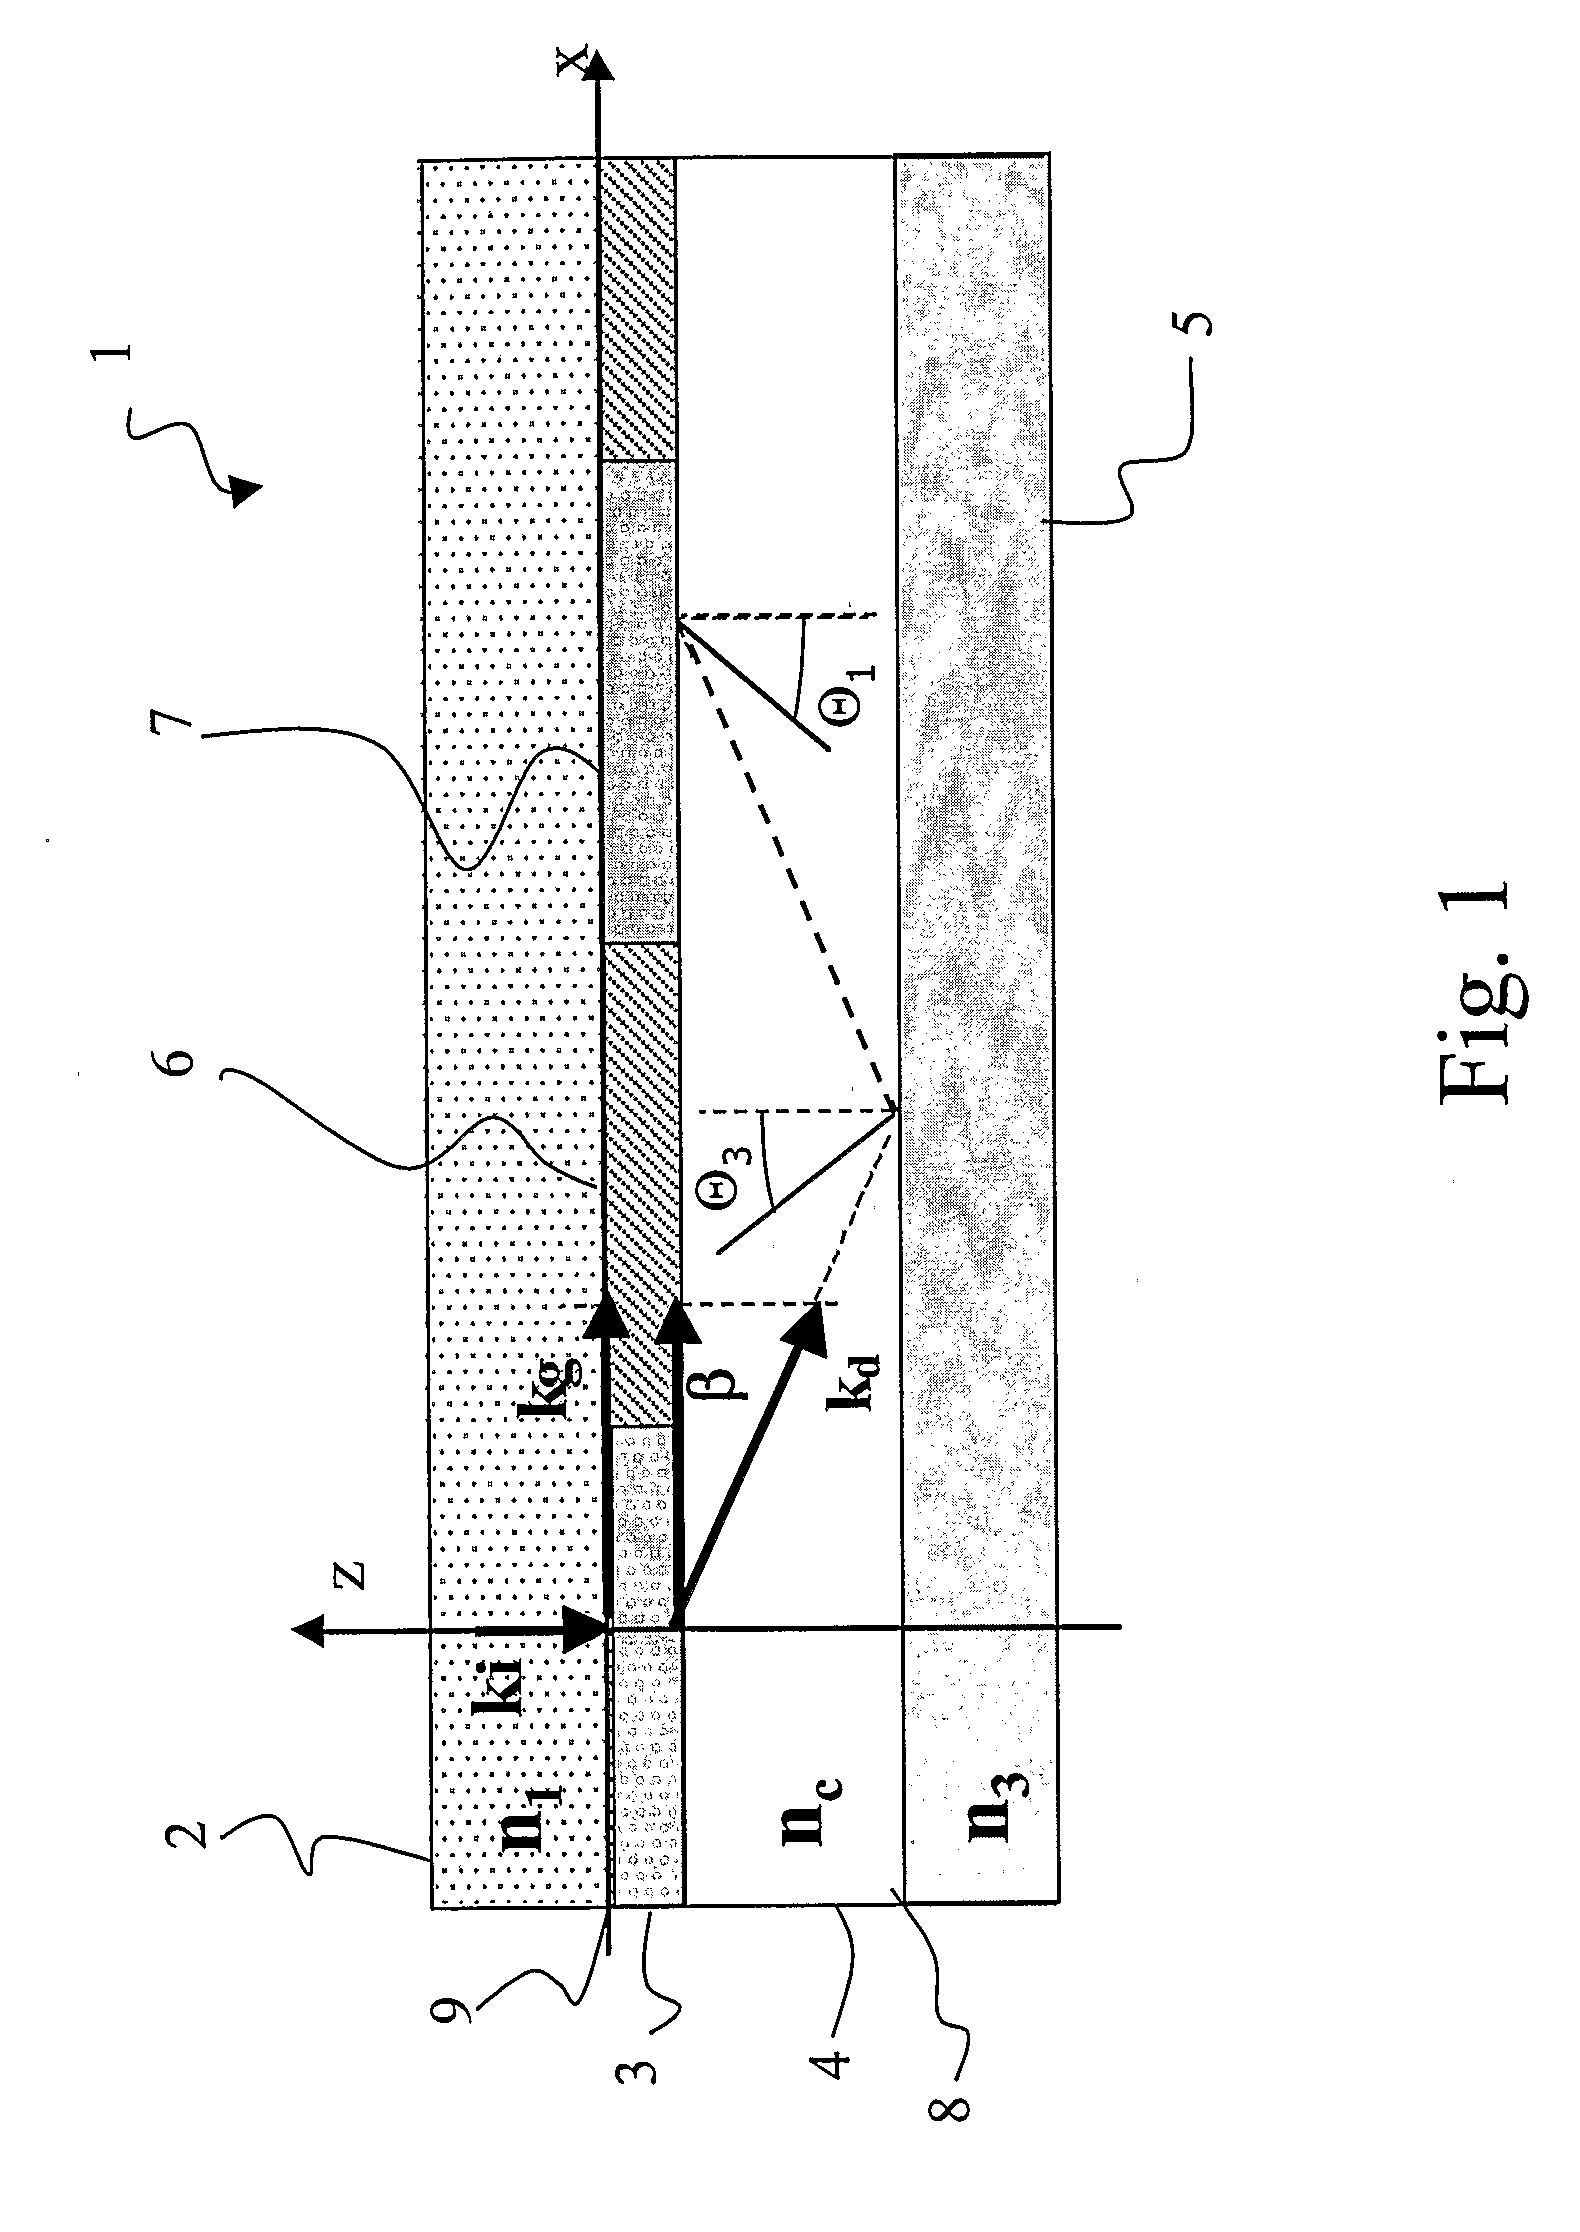 Tunable resonant grating filters